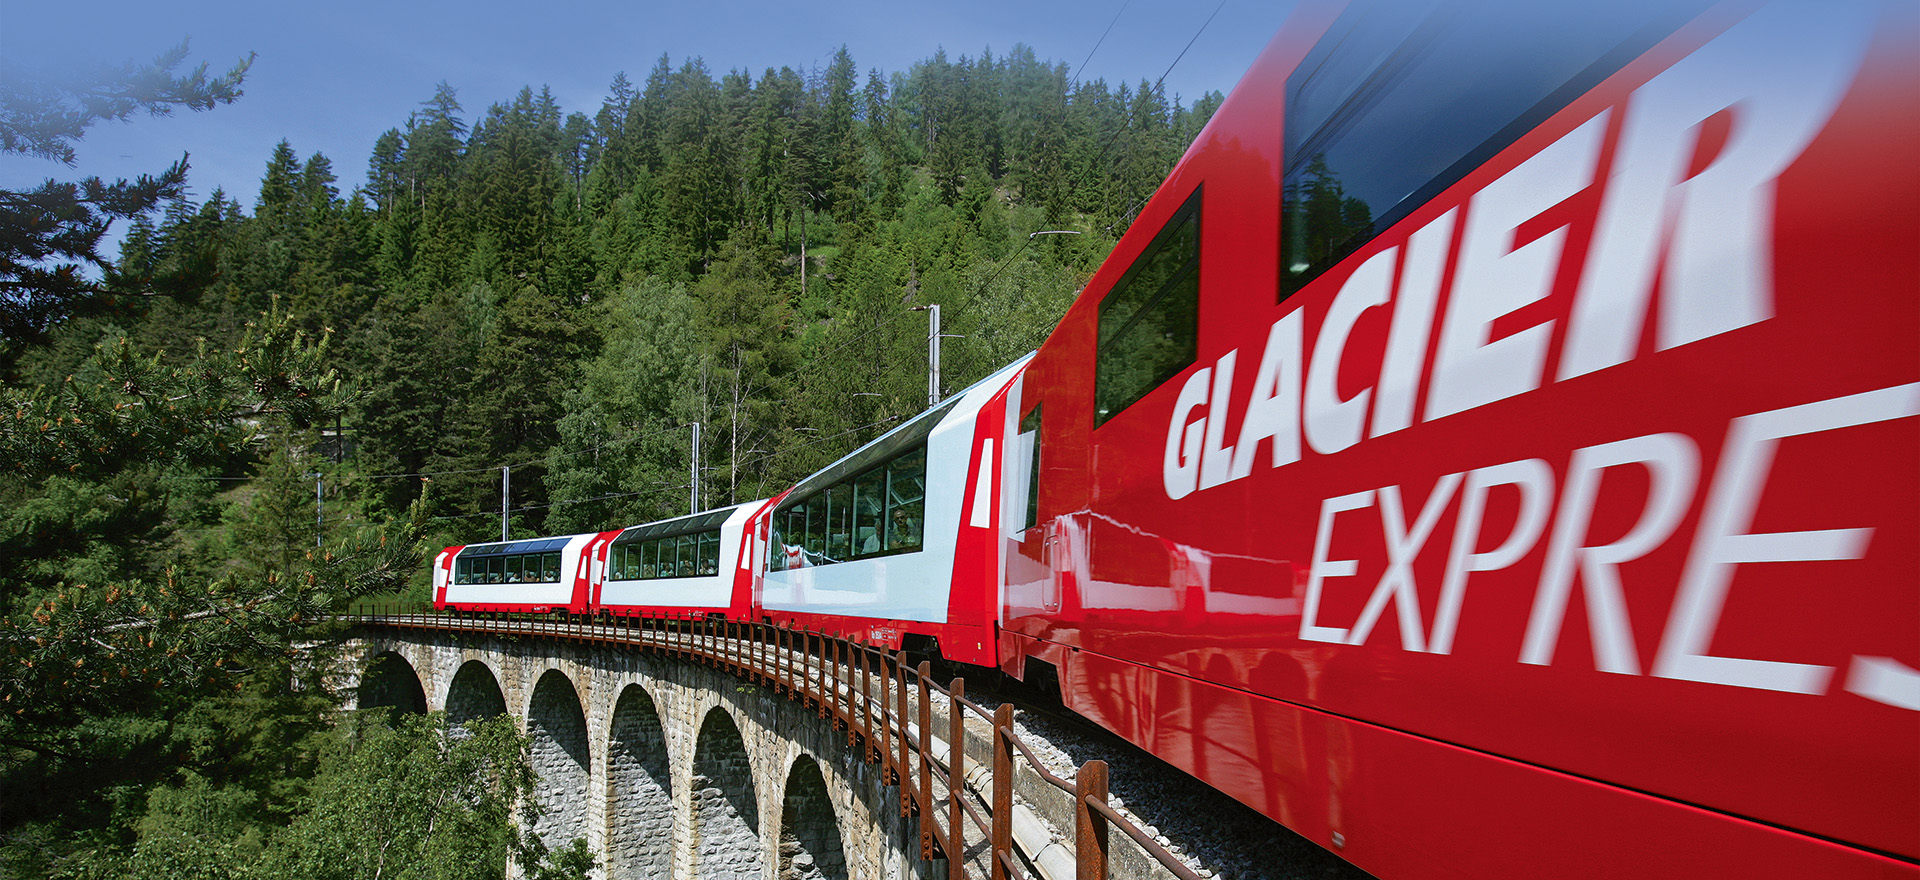 rhine river cruise with glacier express